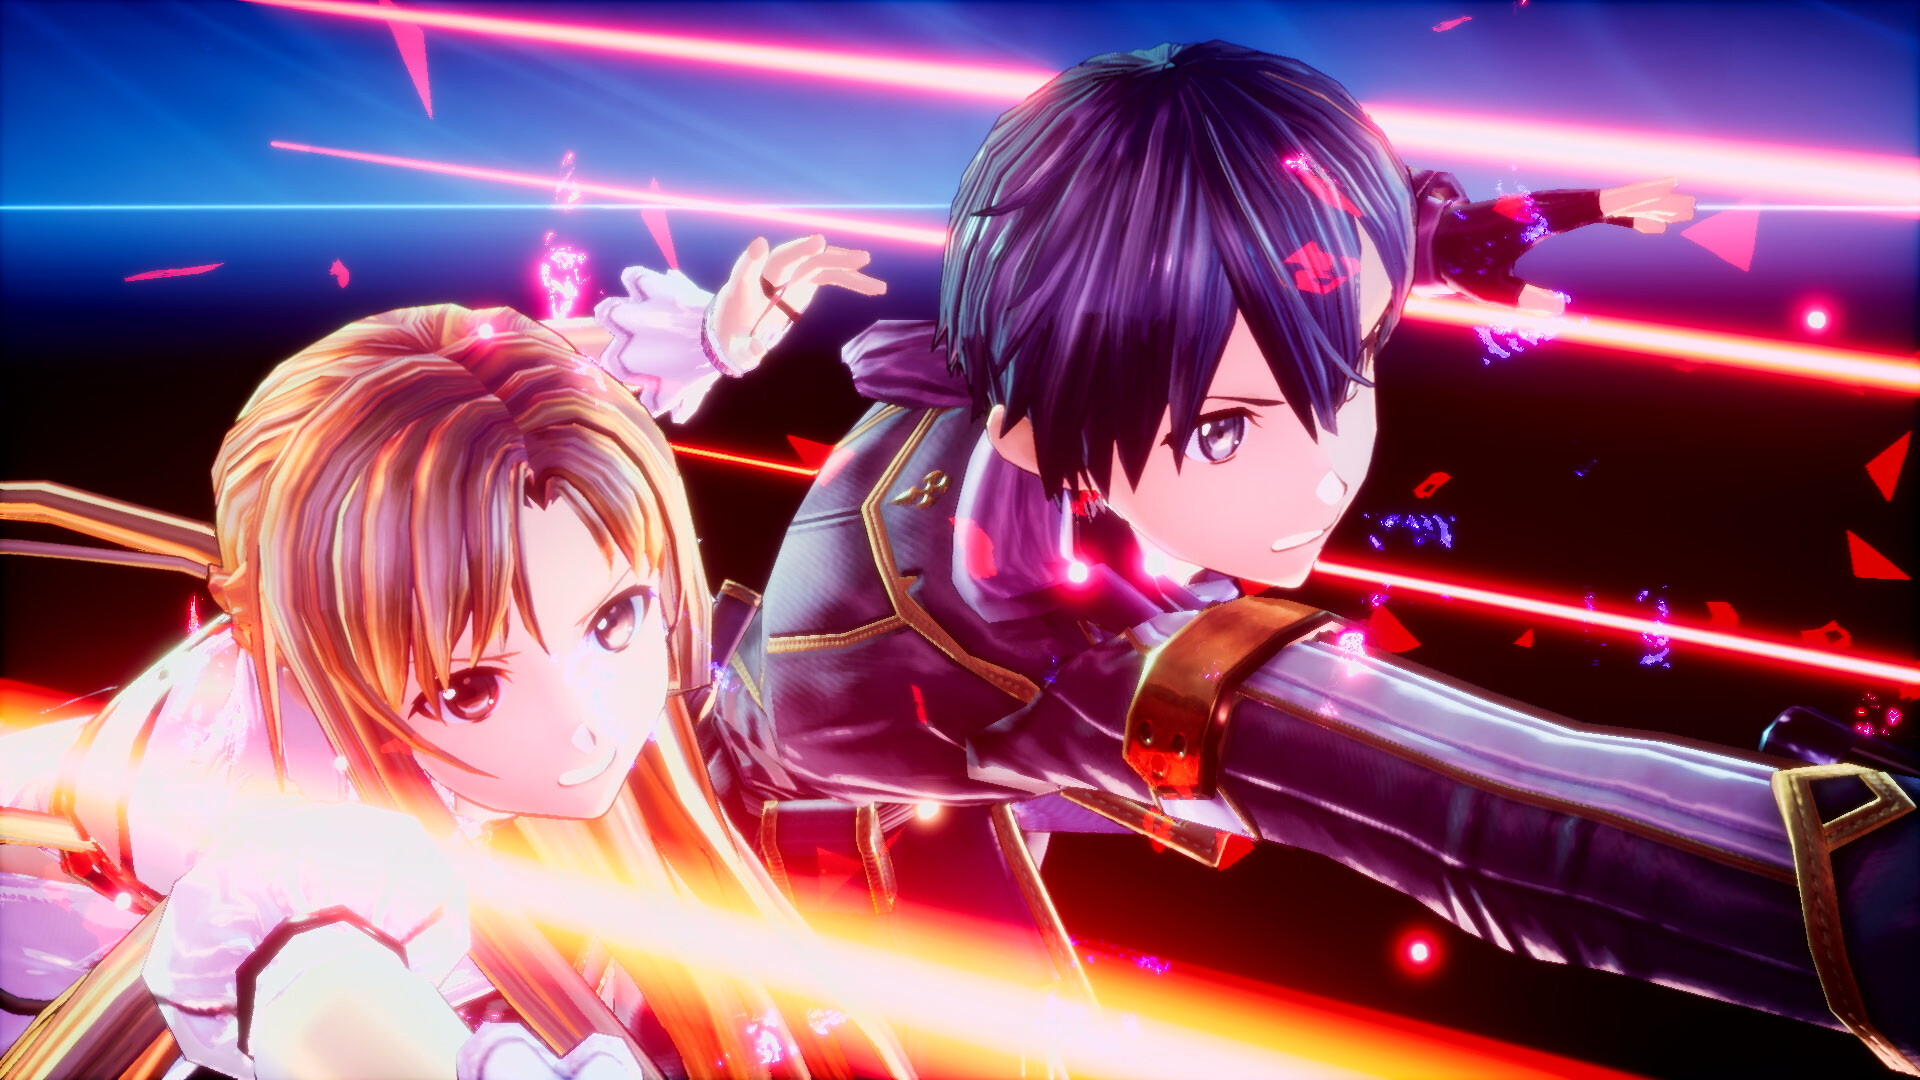 Save 30% on SWORD ART ONLINE Last Recollection on Steam